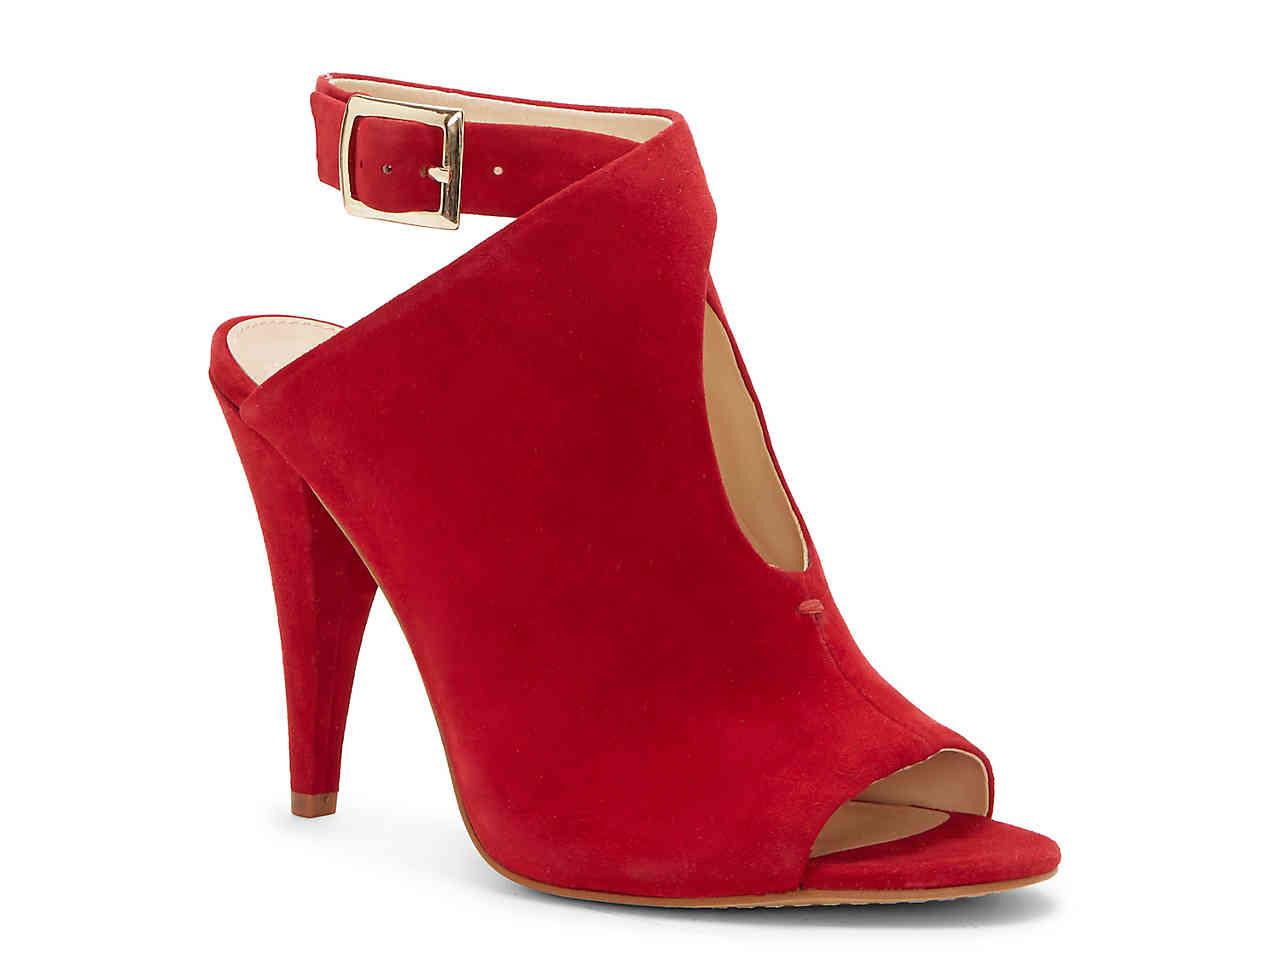 Vince Camuto Leather Aveeria Sandal in Red Suede (Red) - Lyst